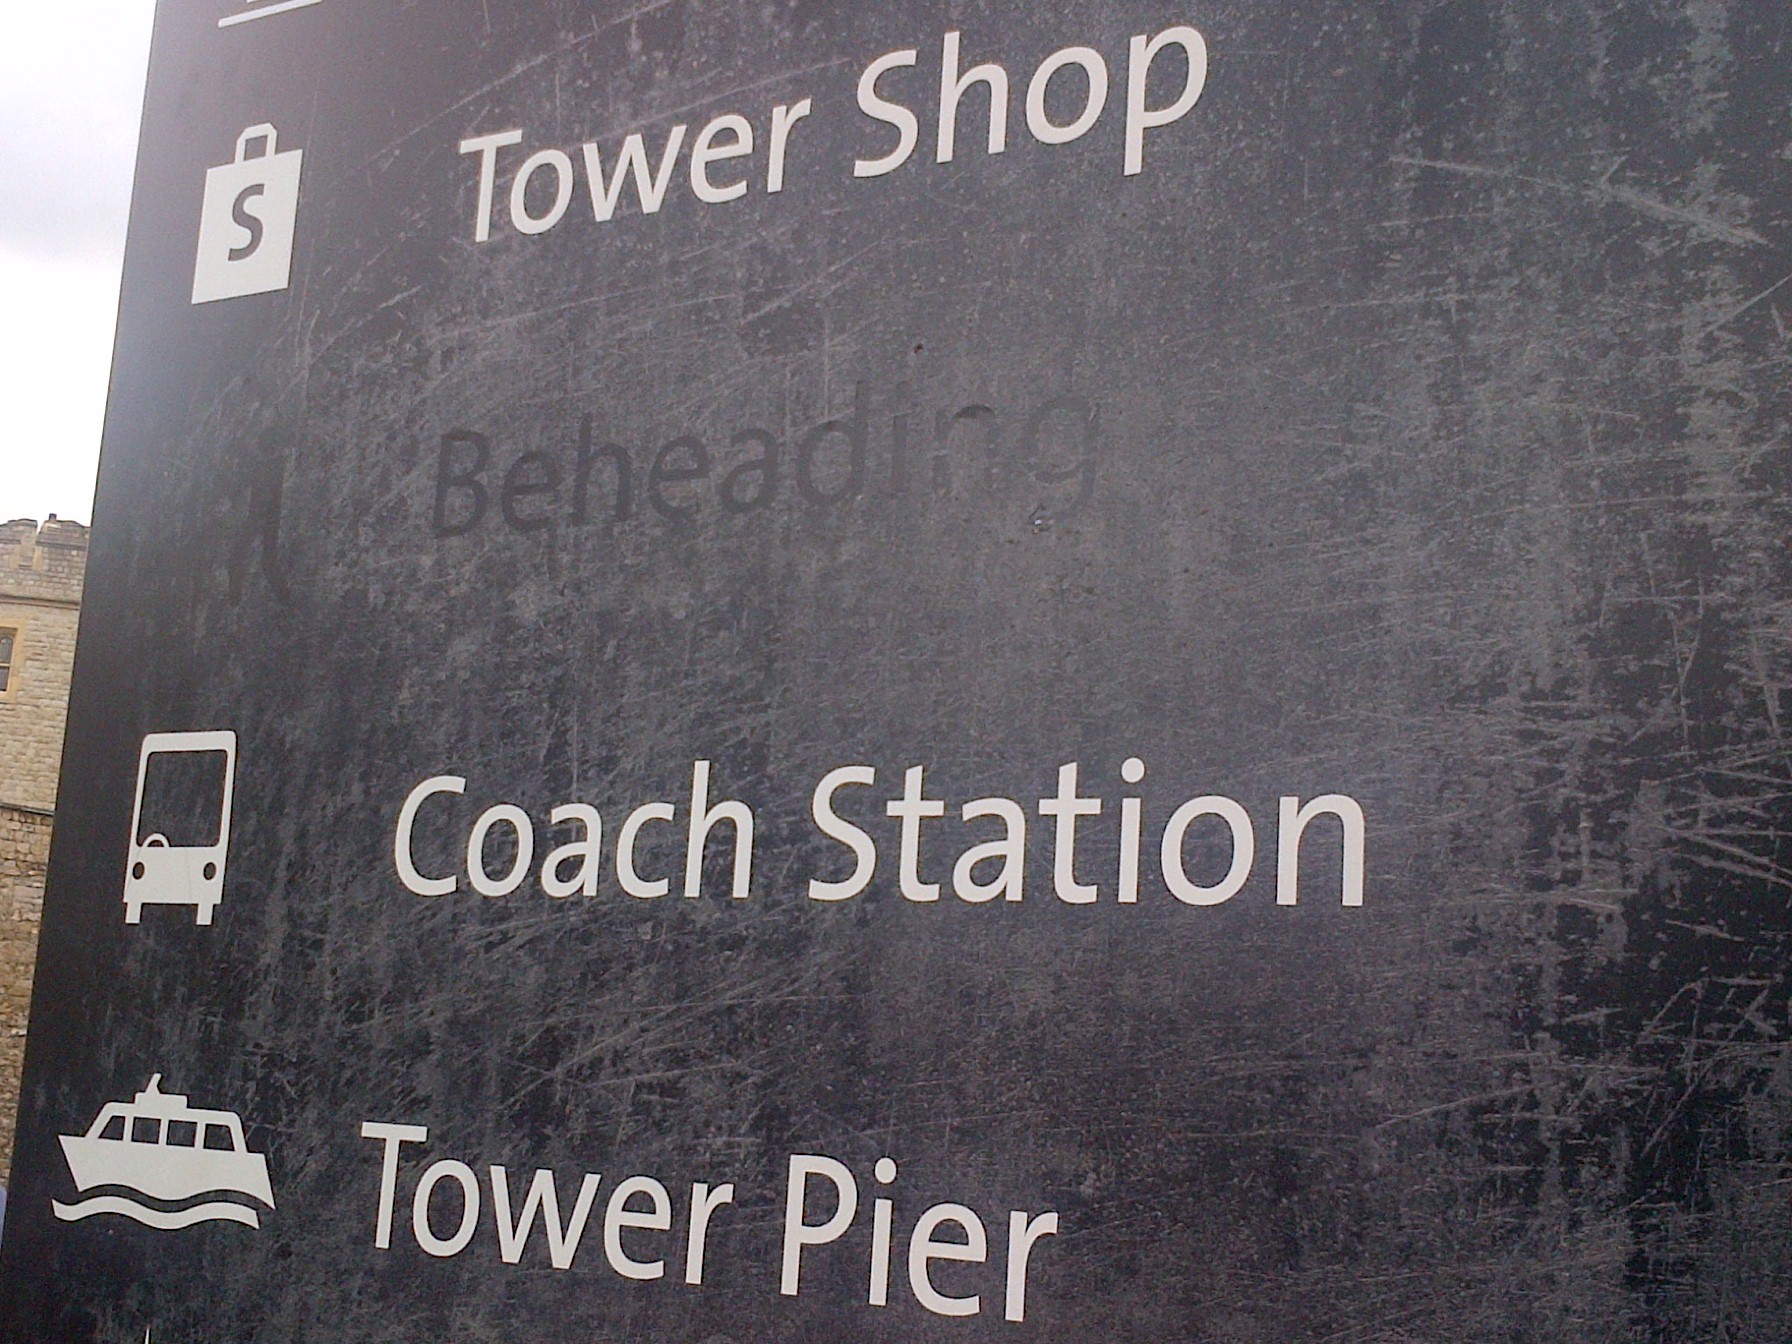 Edited sign at the Tower of London